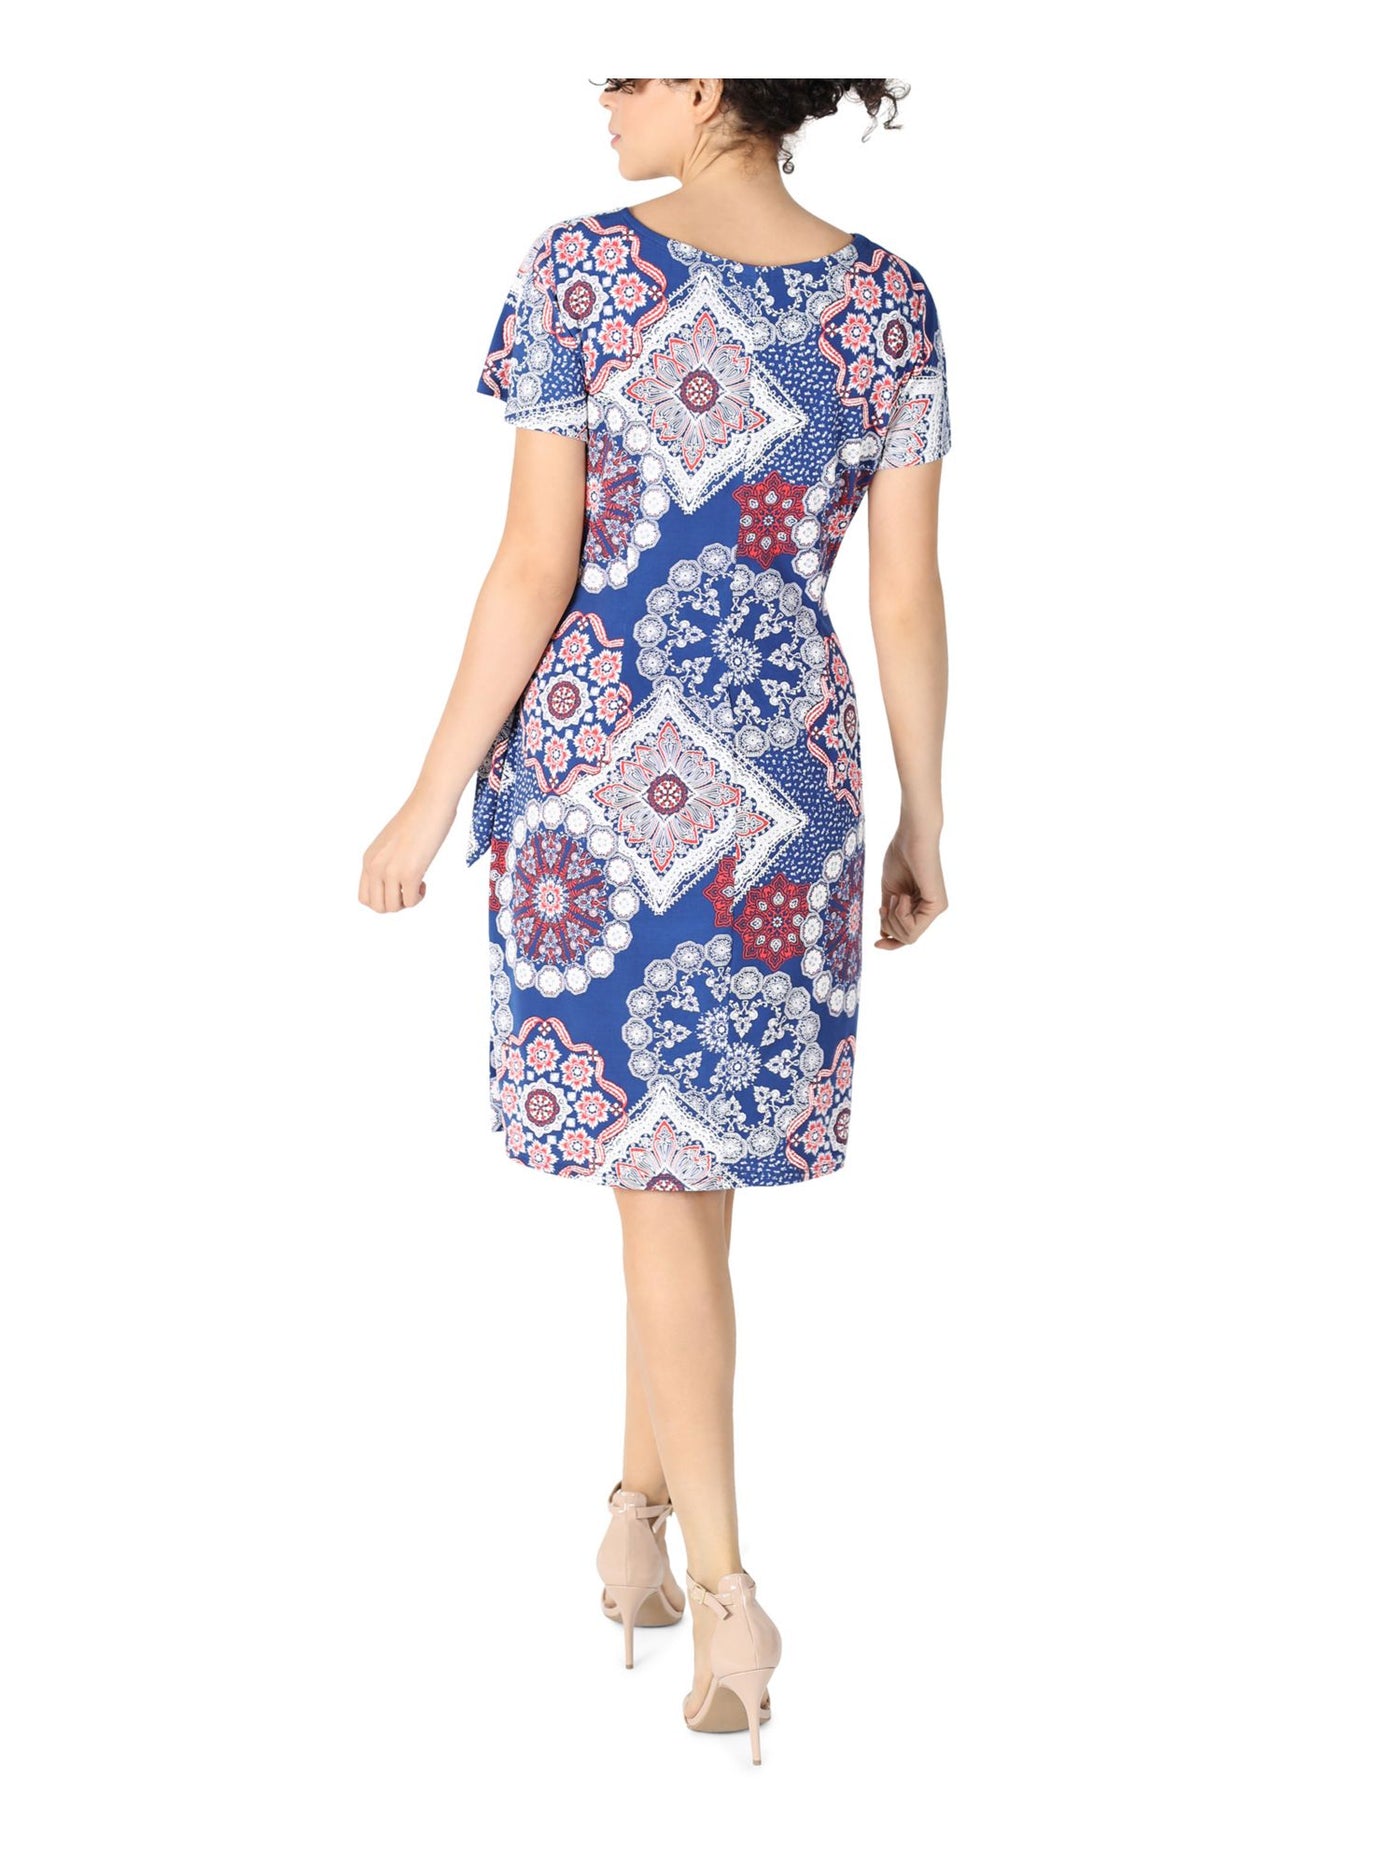 SIGNATURE BY ROBBIE BEE Womens Blue Stretch Textured Tie Printed Short Sleeve Jewel Neck Above The Knee Wear To Work Faux Wrap Dress Petites PS